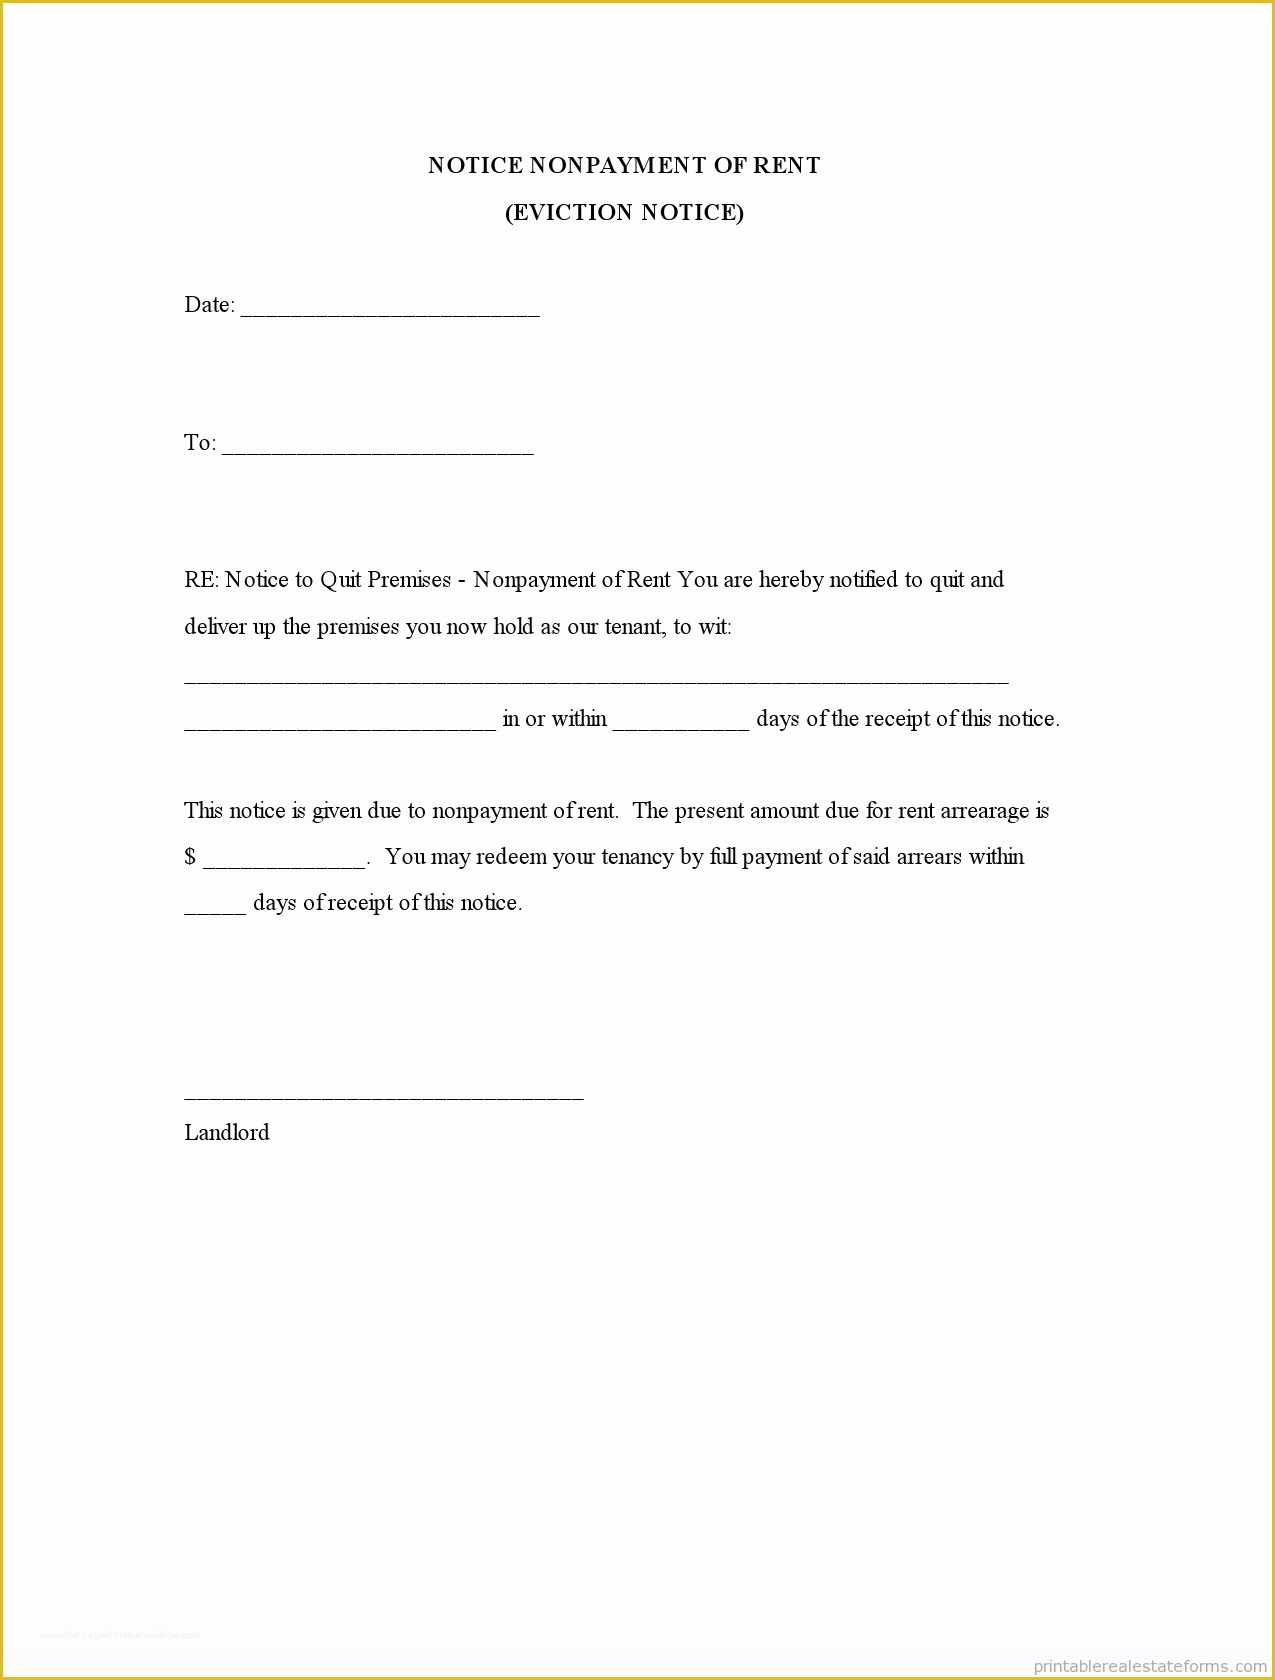 Free Eviction Notice Template Of Free Printable Eviction Notice